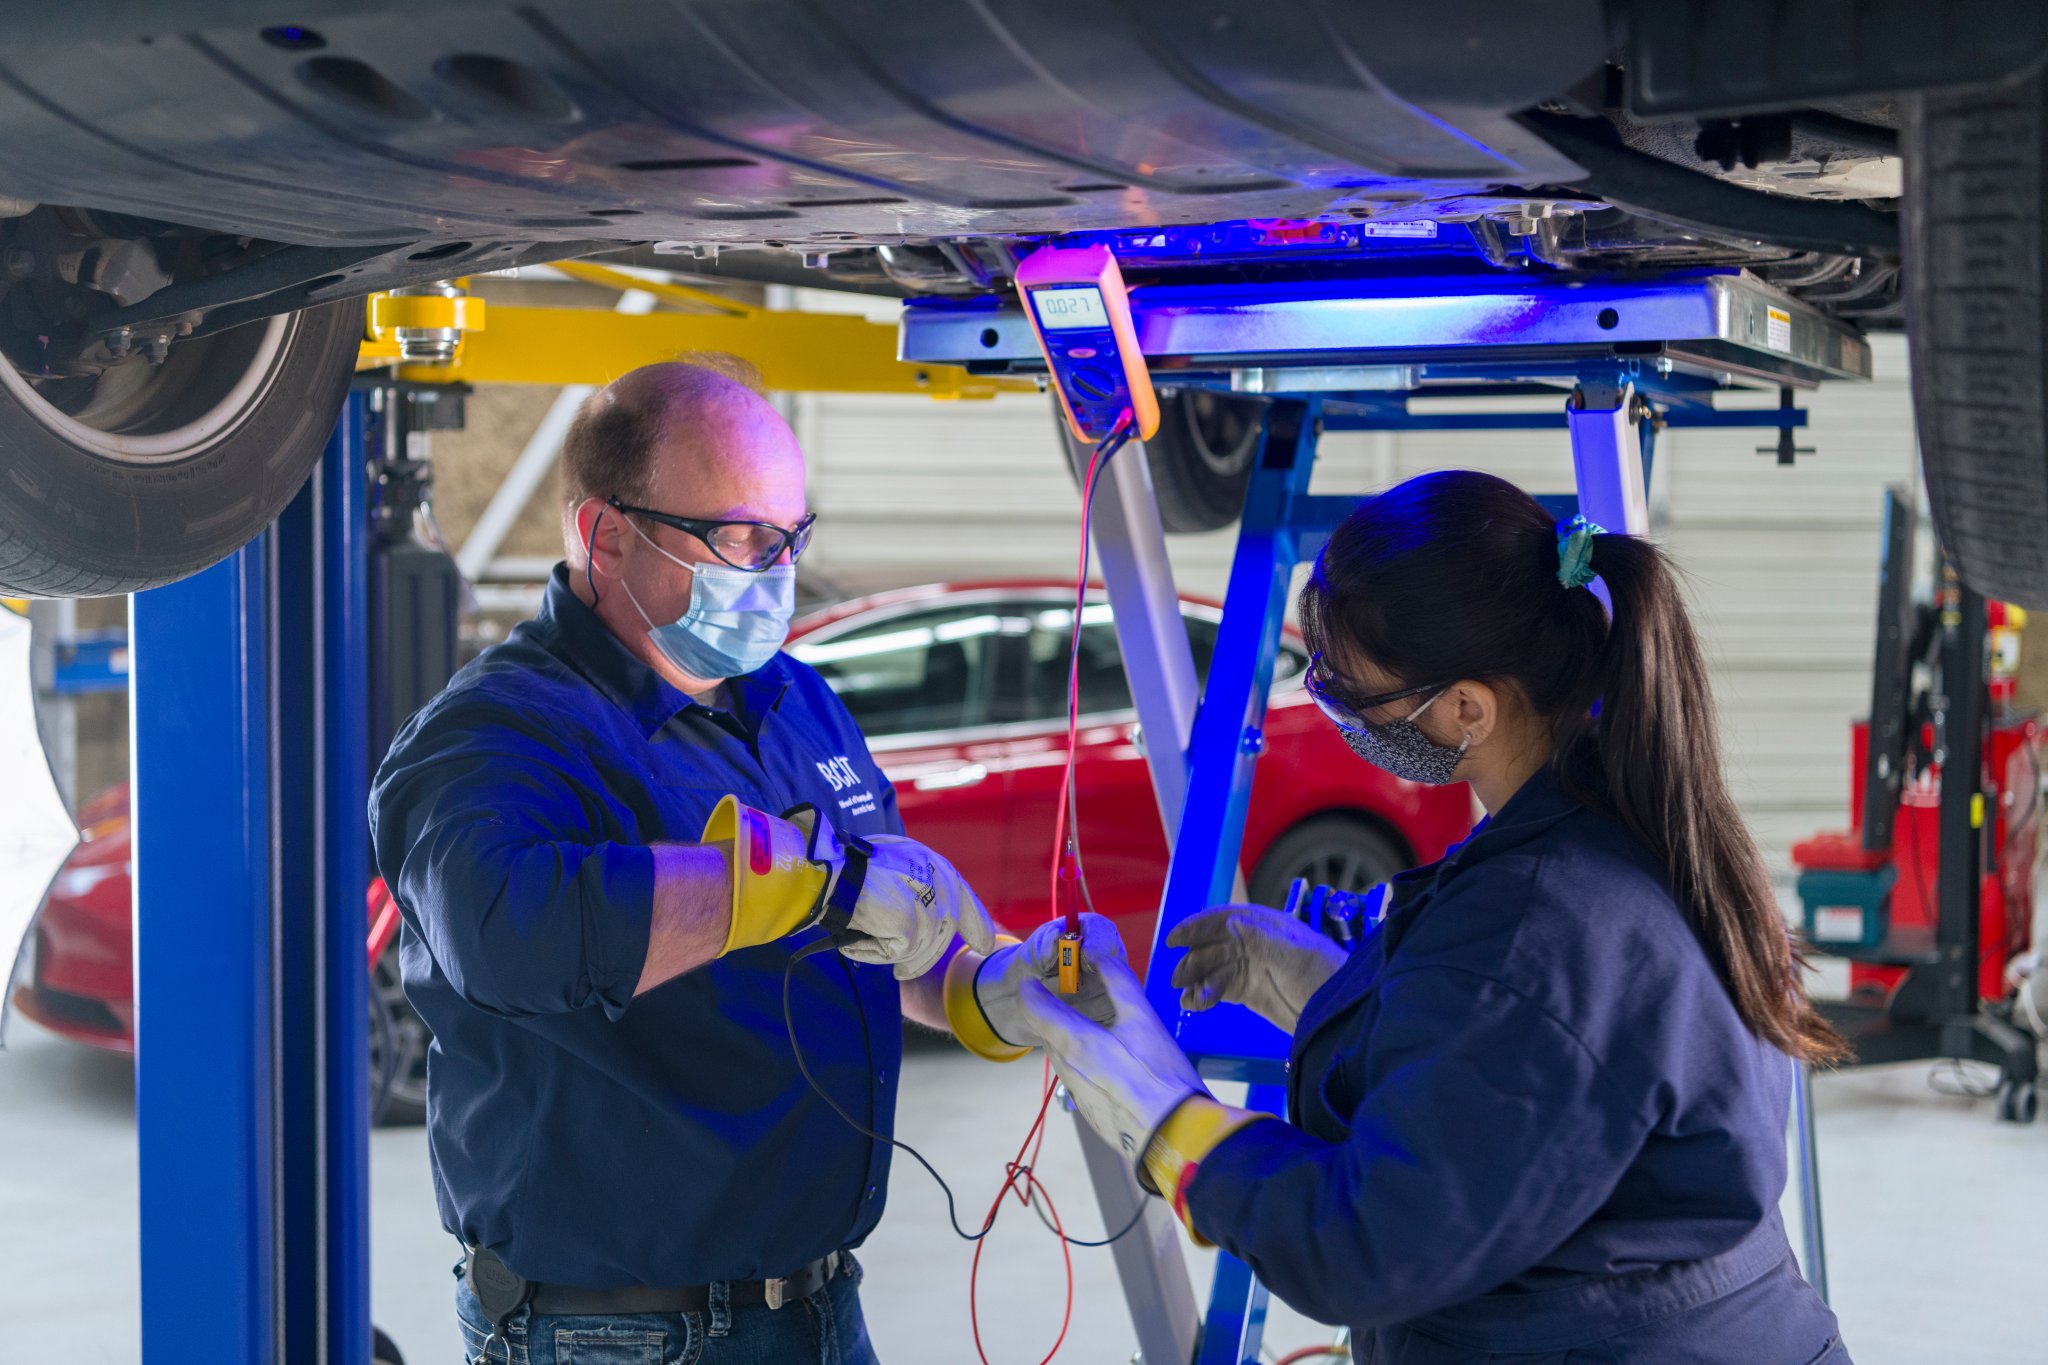 Instructor Jim Berladyn helps a student with a 'live-dead-live' test. It's to ensure no charge is coming out of the EV battery before it's removed for servicing.